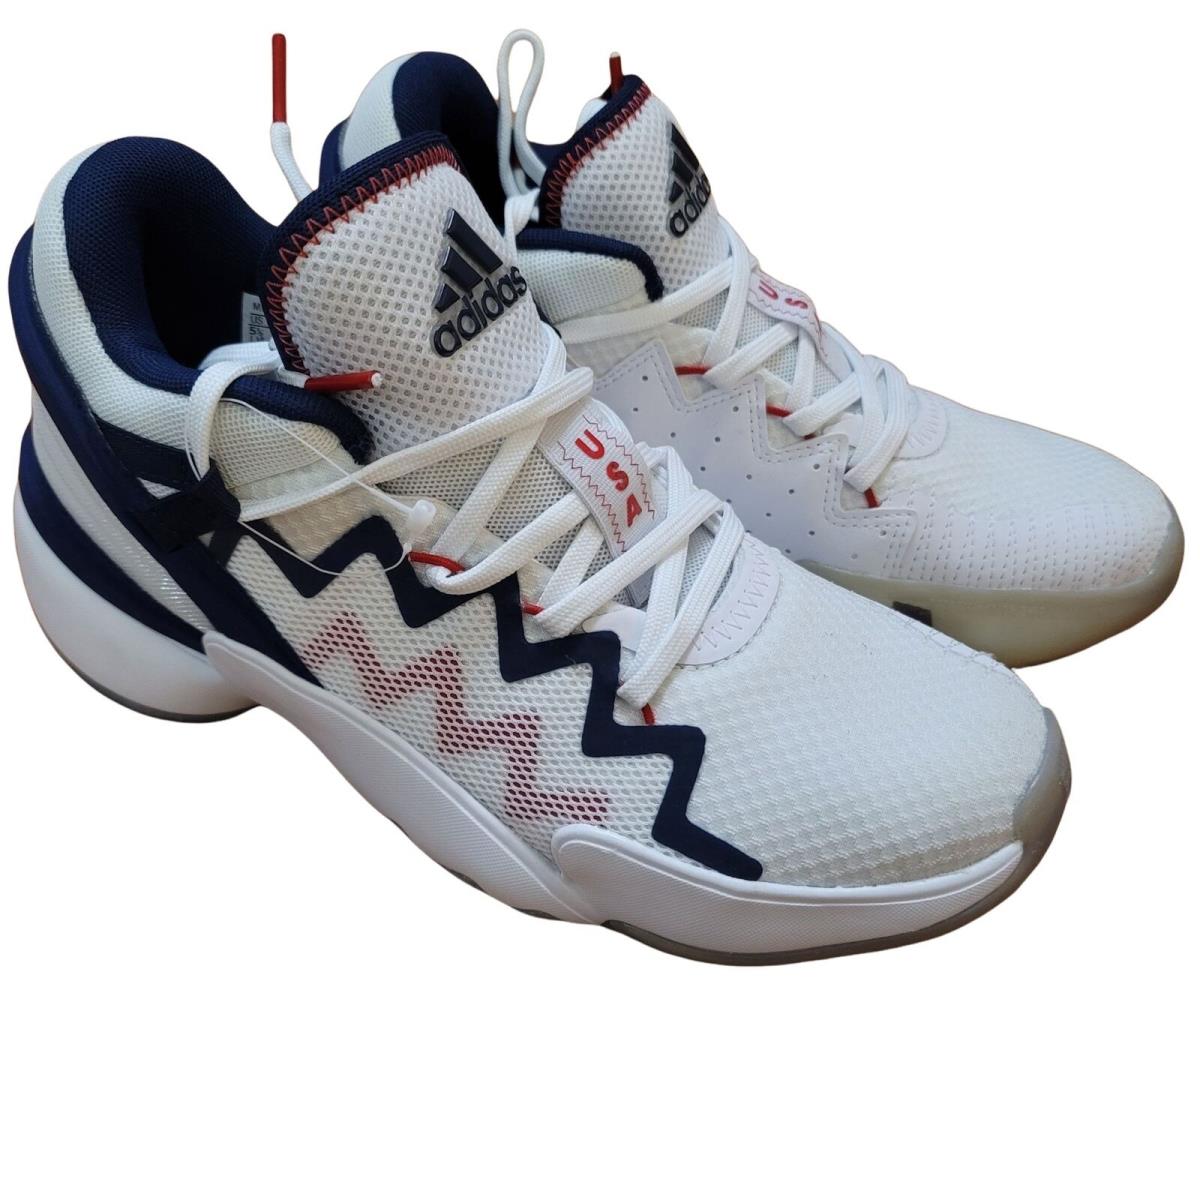 Adidas Bounce D.o.n. Mitchell Issue 2 White Usa Basketball Shoes 5.5 FY0872